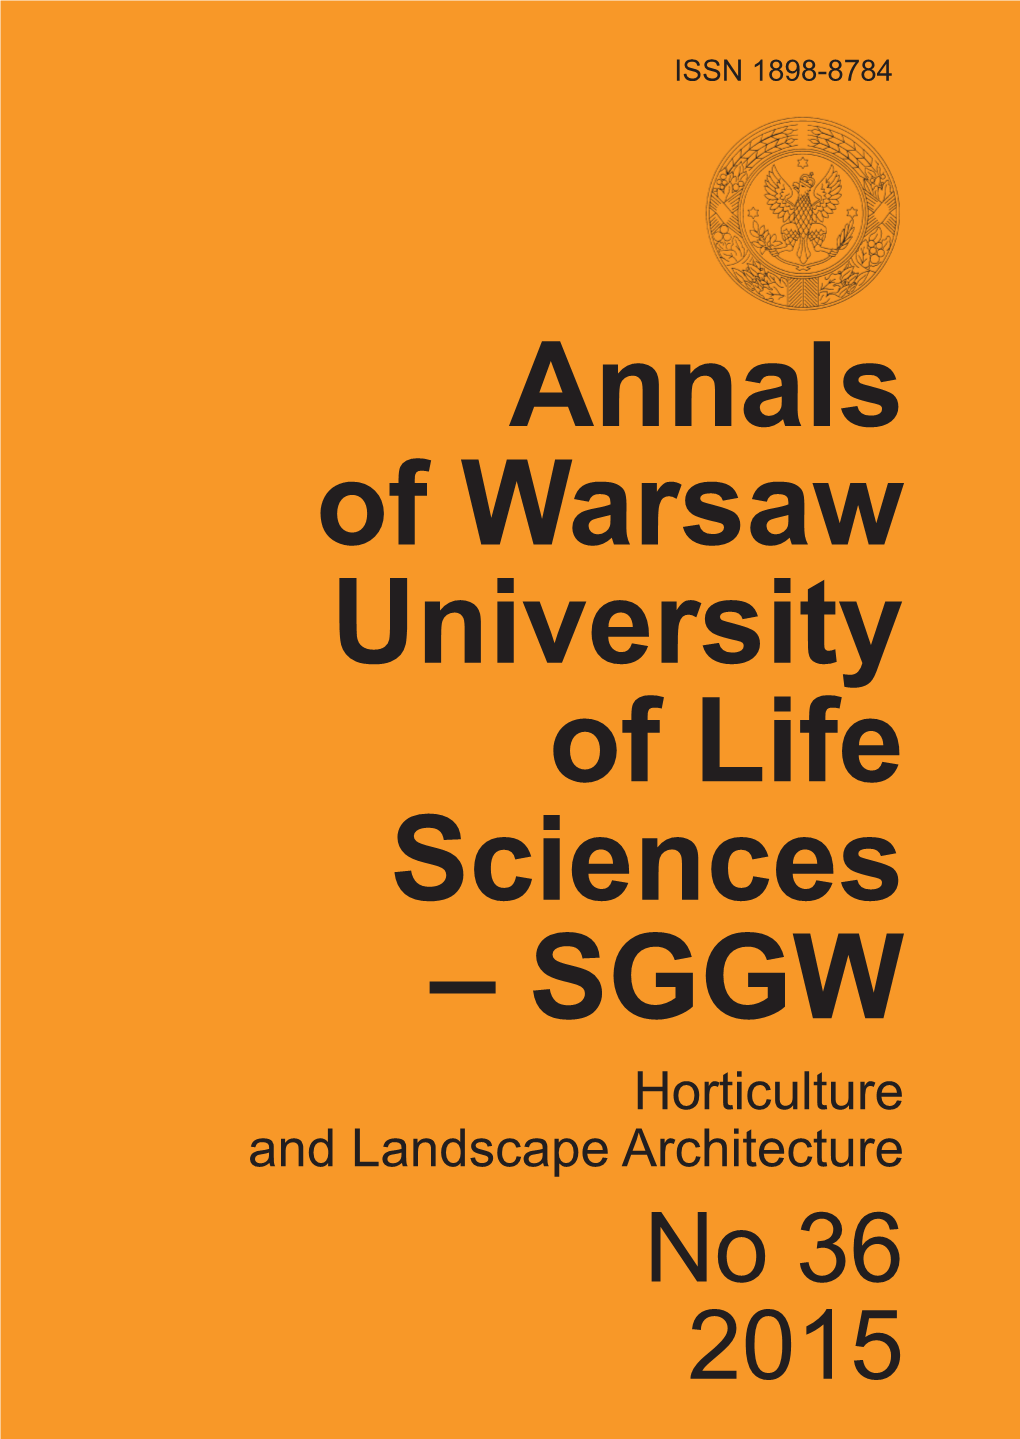 Annals of Warsaw University of Life Sciences – SGGW Horticulture and Landscape Architecture No 36 ISSN 1898-8784